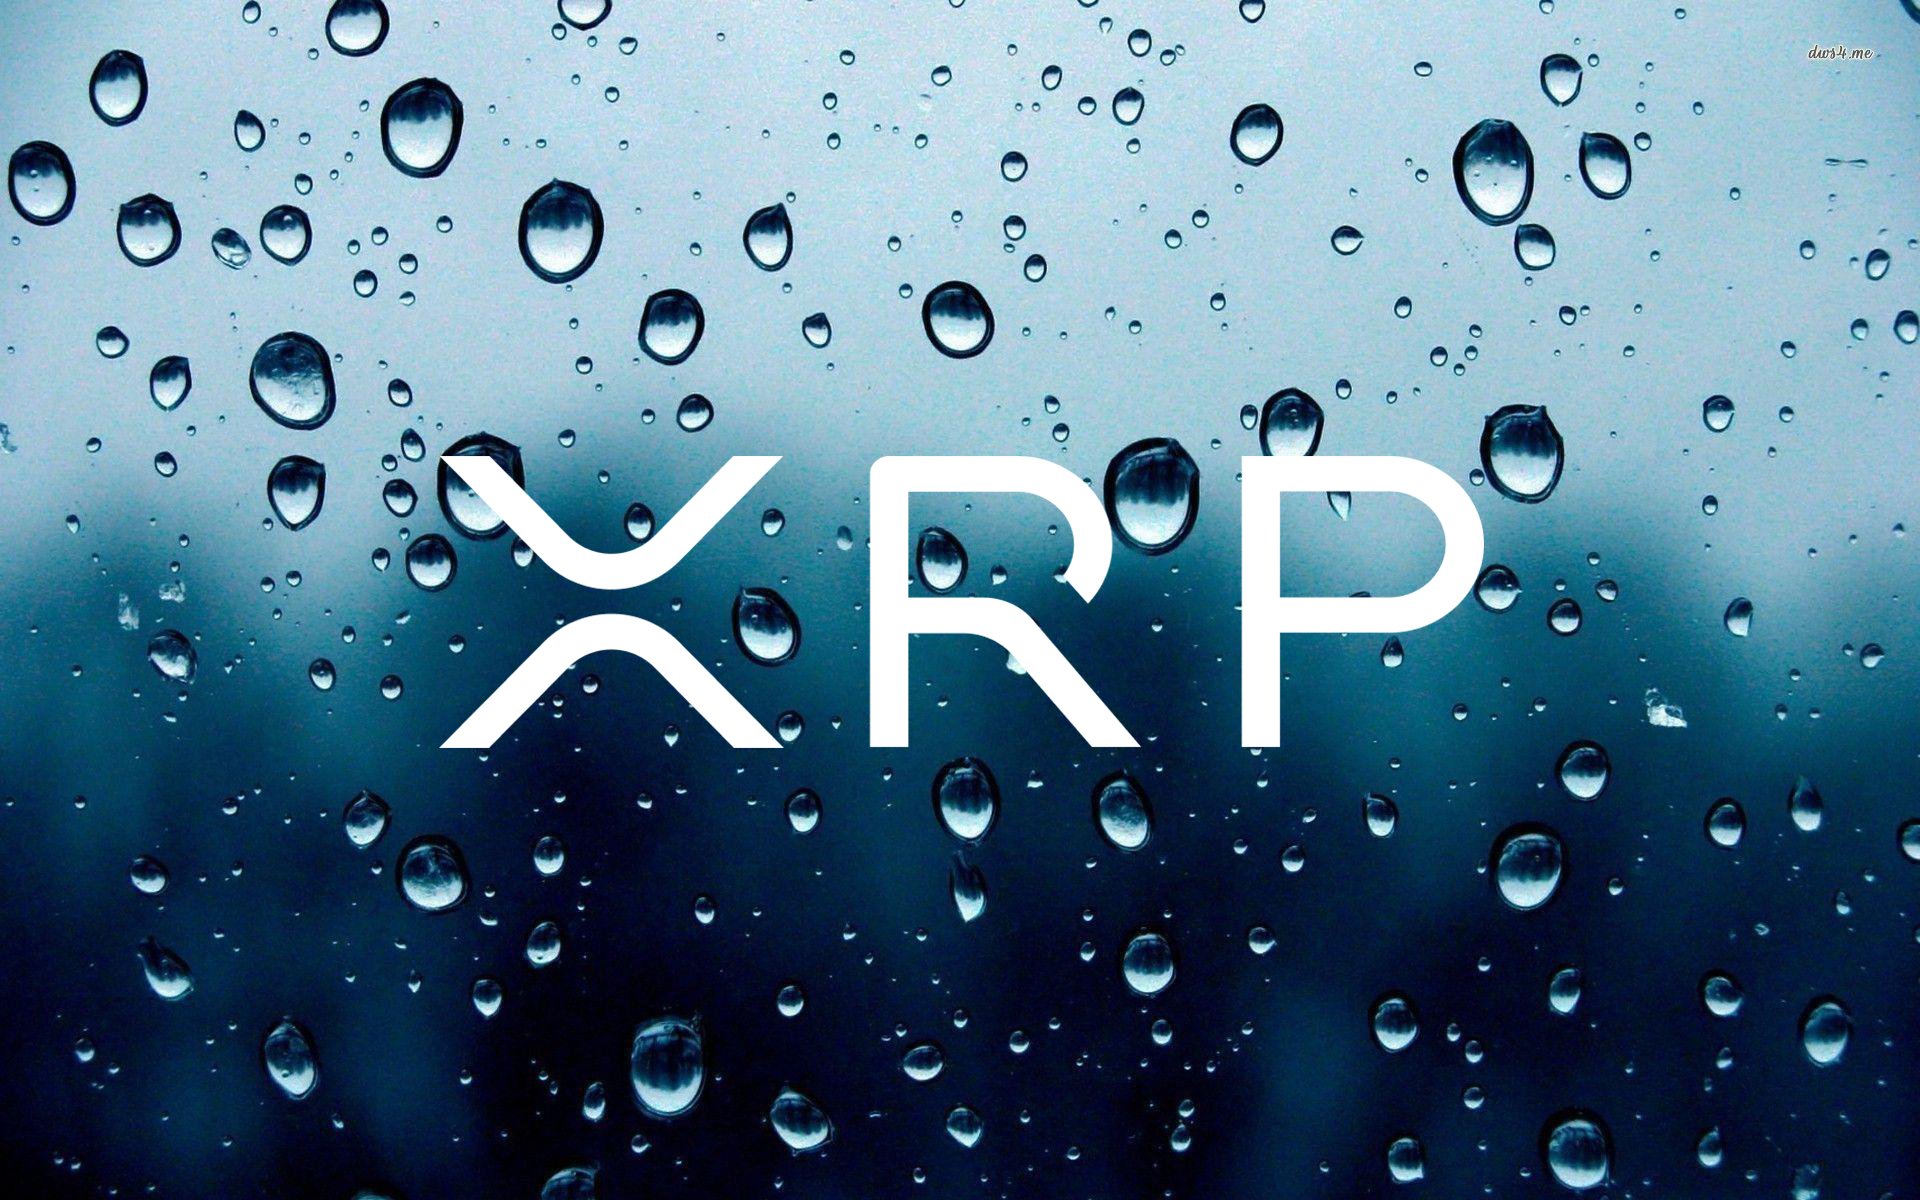 Ripple shoves in 1 billion XRPs into the Market